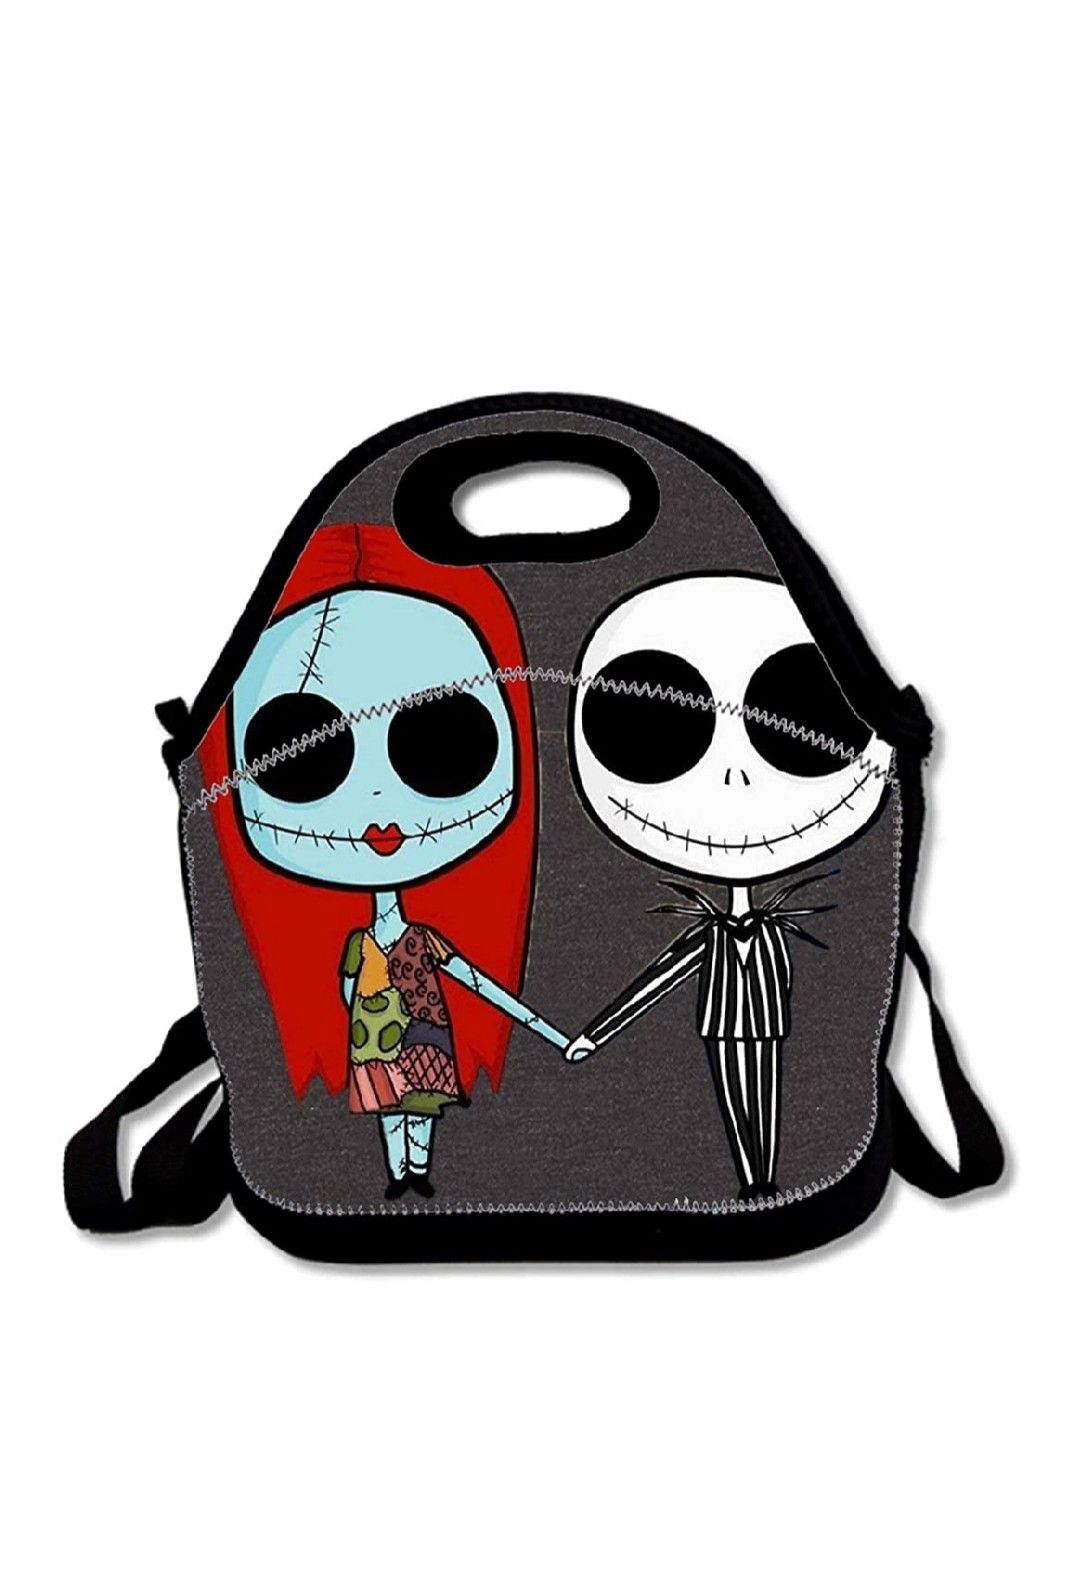 Disney's The Nightmare before Christmas lunchbox bag